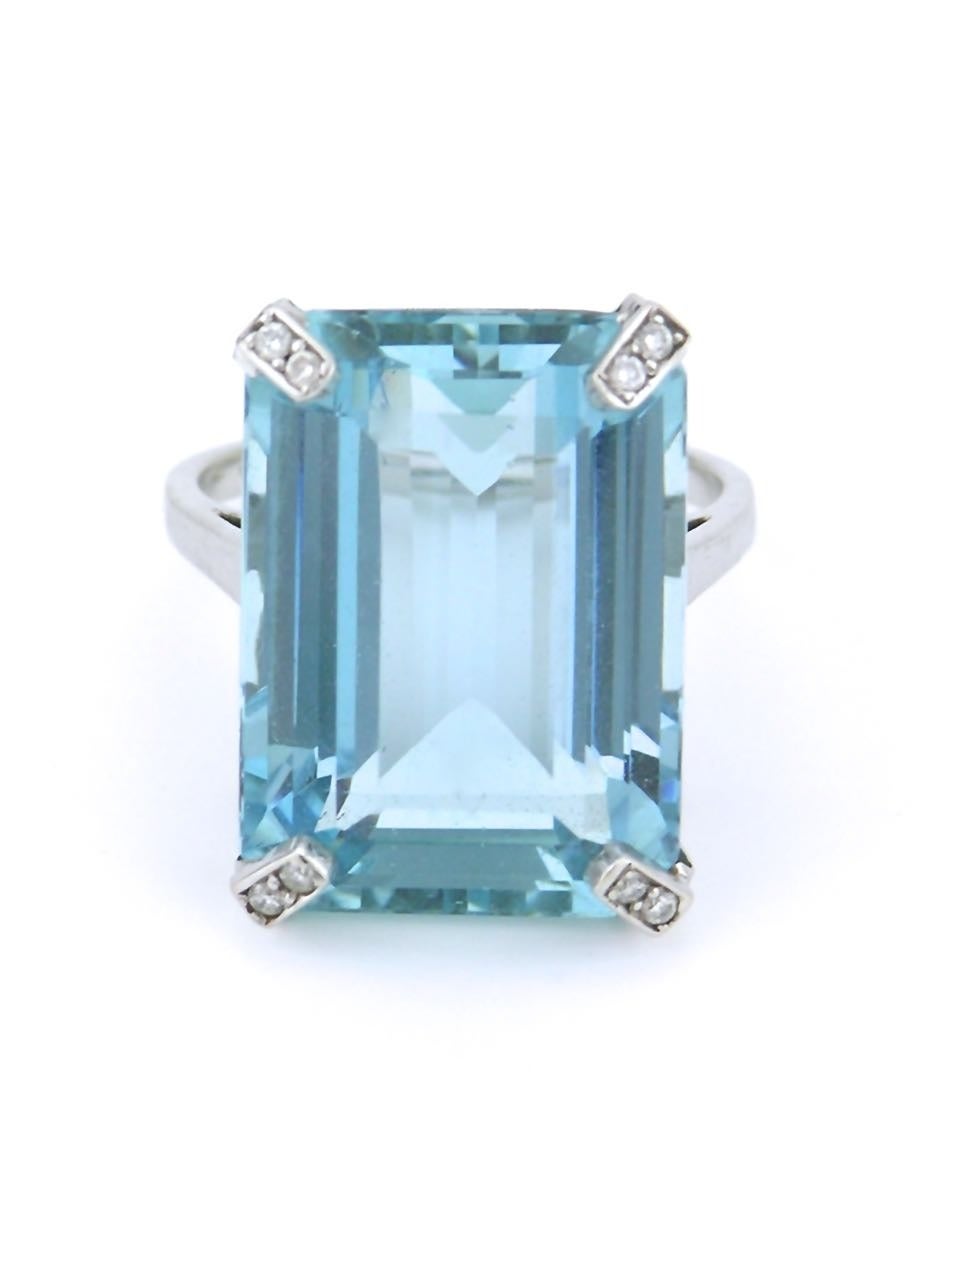 An emerald cut aquamarine of 19cts of very good colour intensity and clarity. Four claw set in 18k white gold with small diamonds mounted into the claws over a pierced and fretted gallery of scrolls.

Currently size N (USA 6 1/2), please enquire